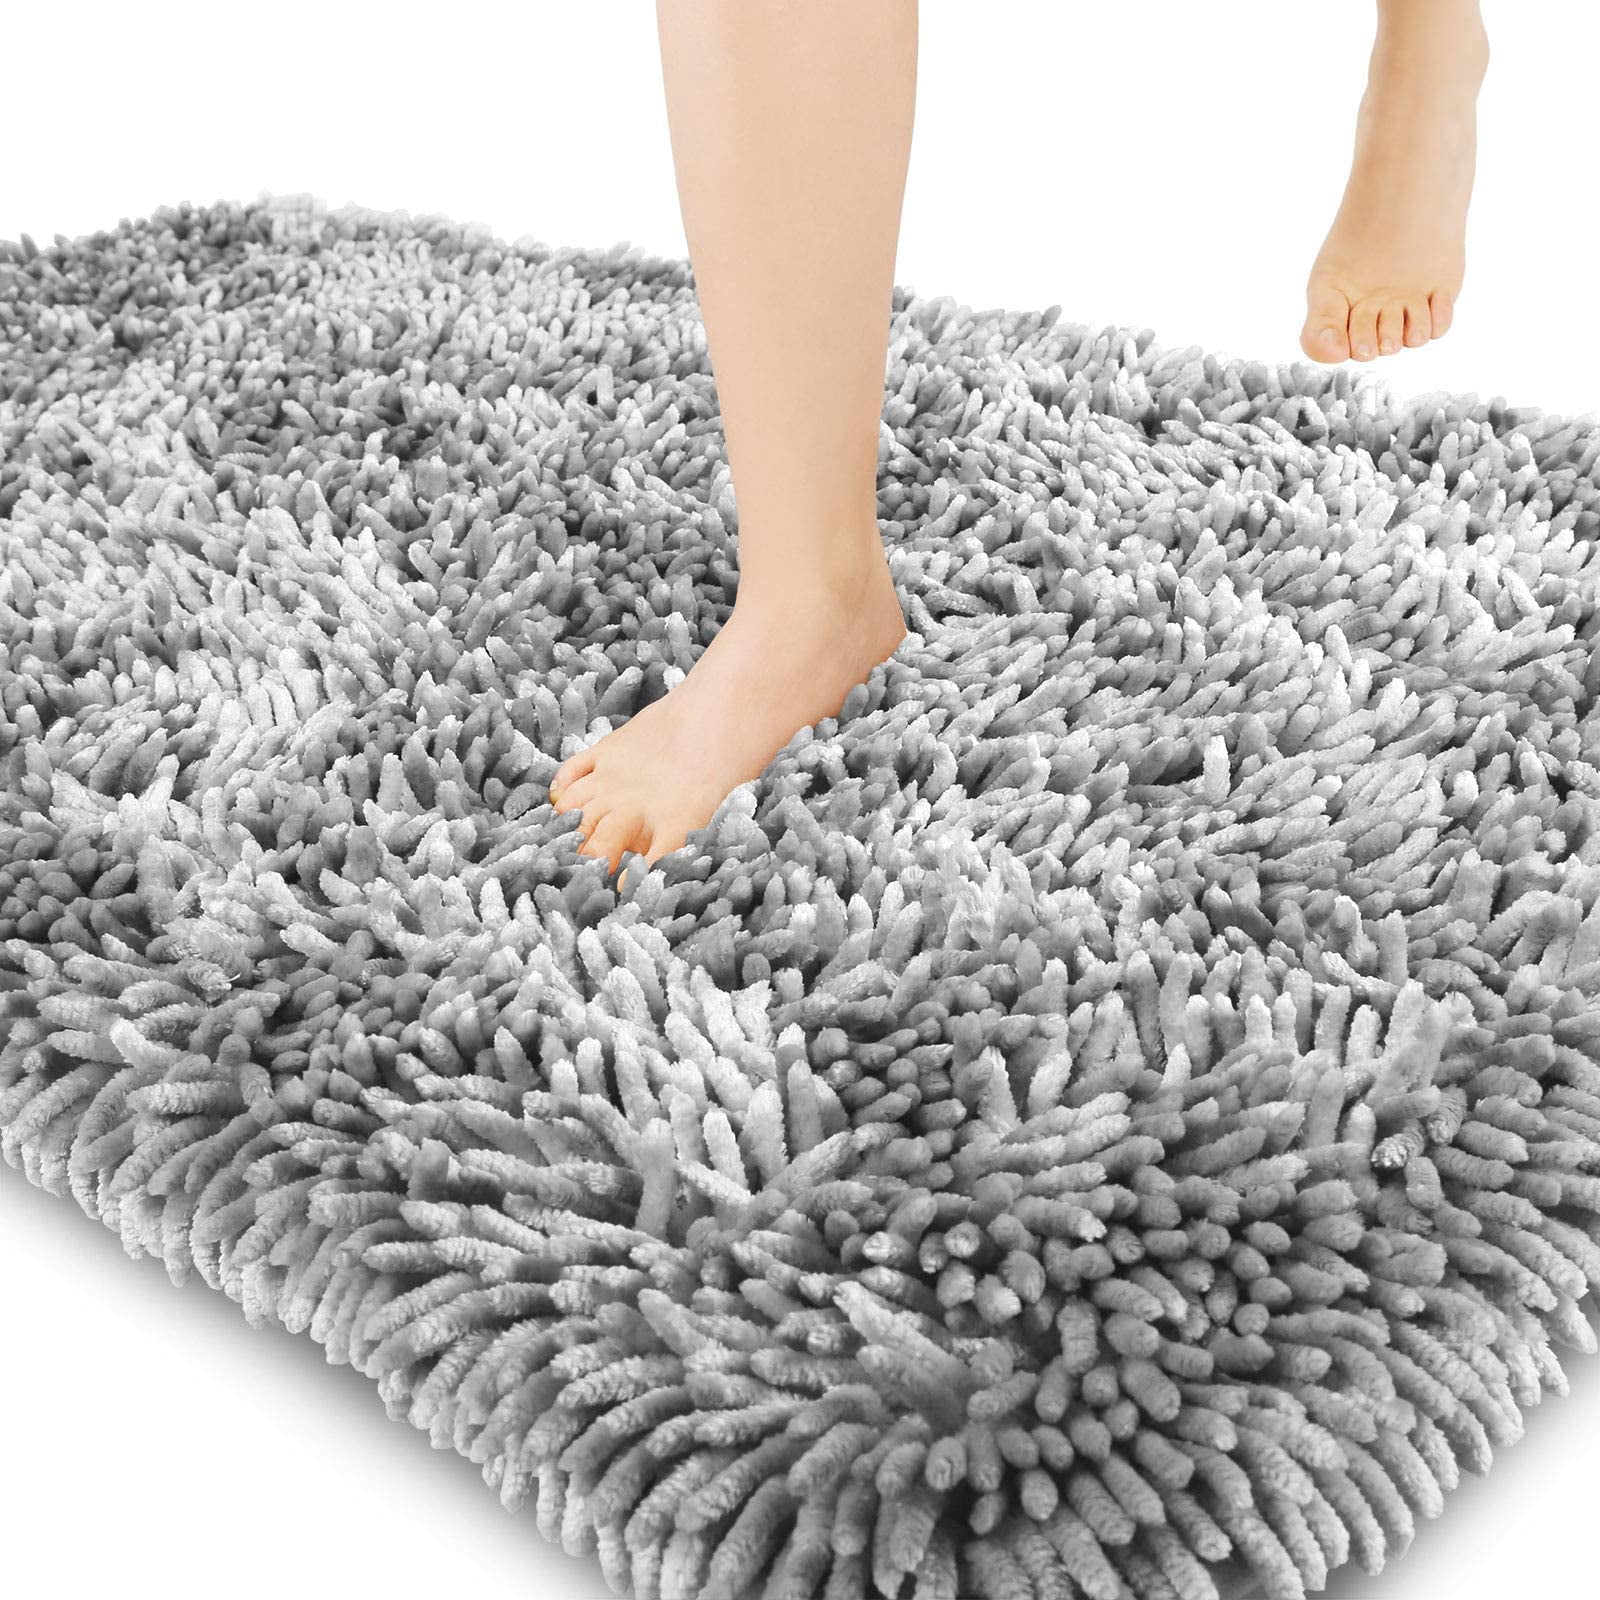 Soft Foam Area Rugs Explosion of a Star Cosmic Ray Washable Non Slip Kitchen Rugs Bath Rug for Home Decor Indoor/Outdoor 36x24in